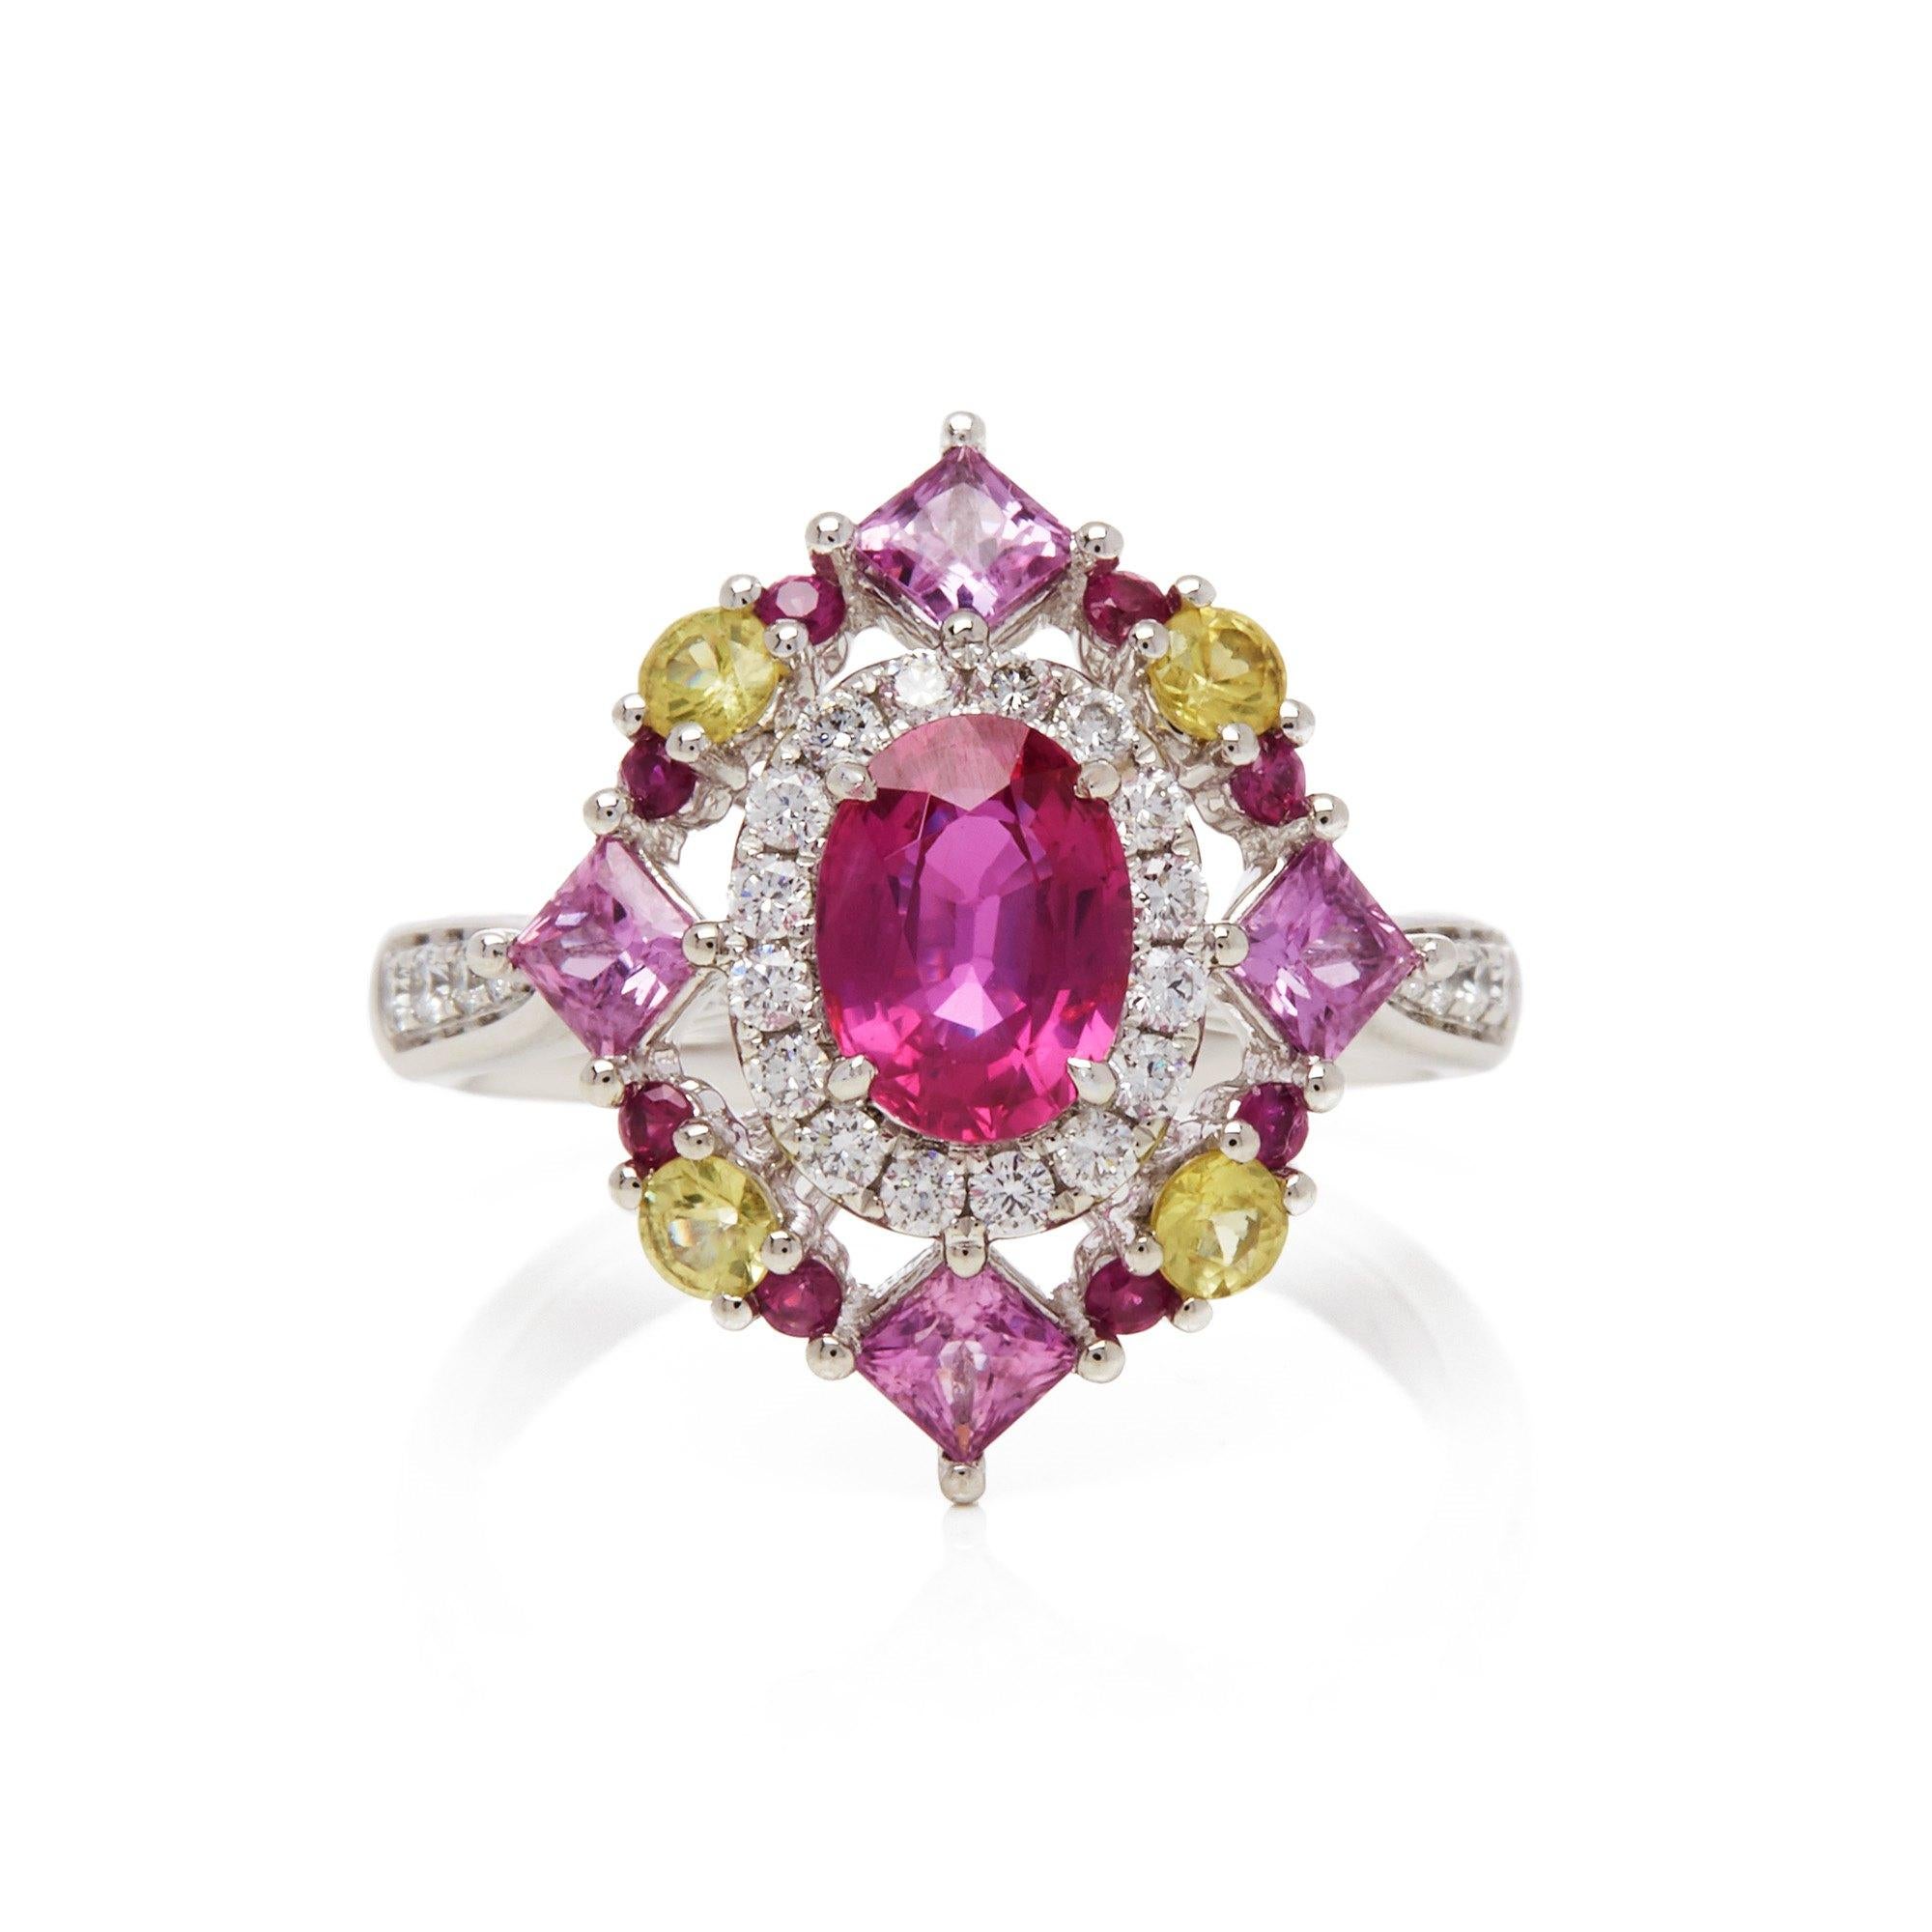 This ring designed by David Jerome is from his private collection and features one oval cut Ruby sourced in Mozambique totalling 1.30cts. Set with a mix of round brilliant cut Diamonds, pink and yellow Sapphires totalling 1.73cts combined. Mounted